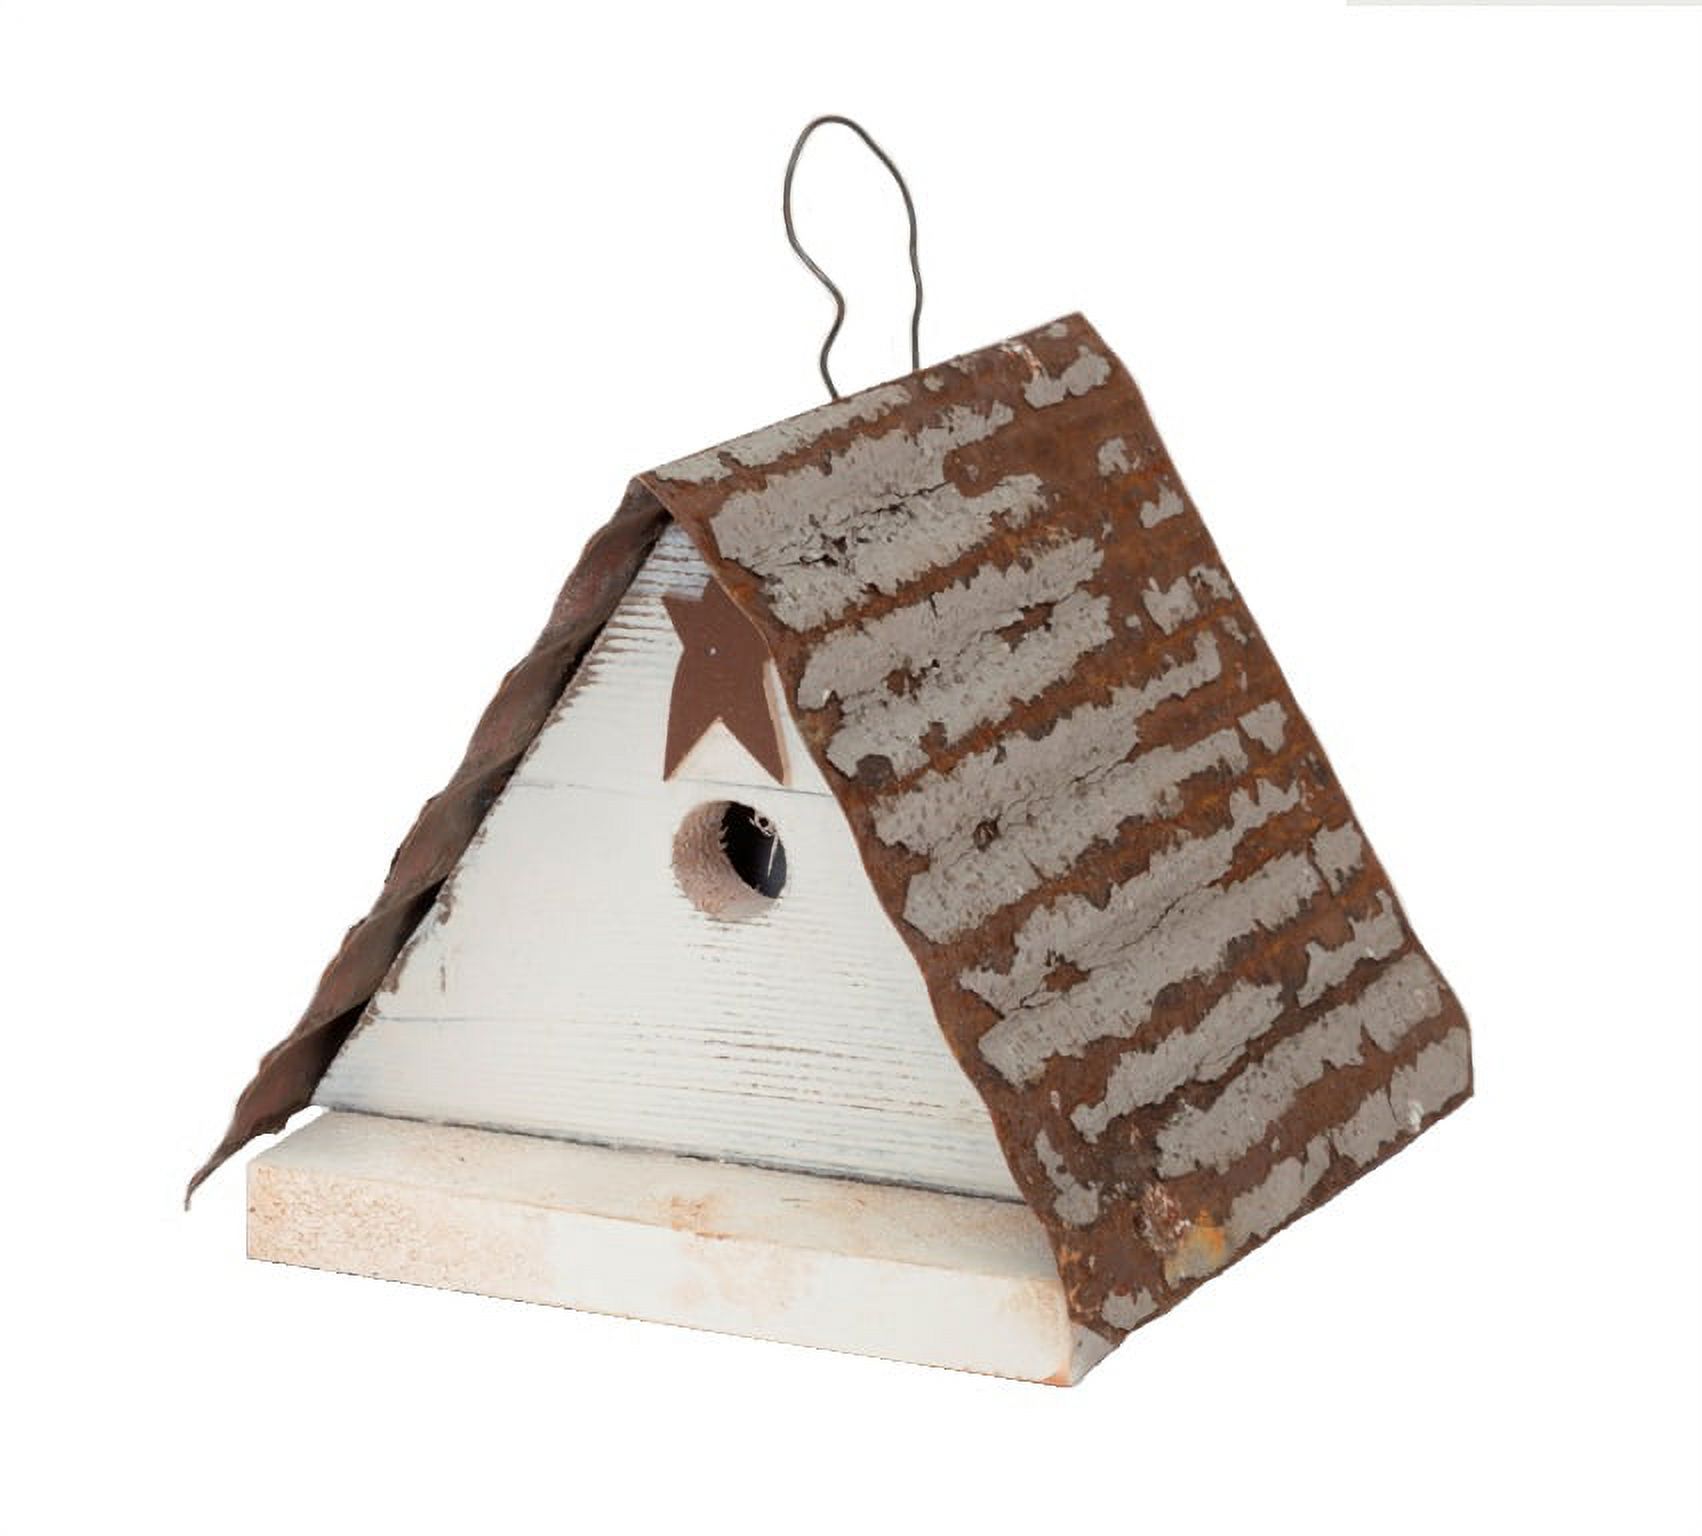 CC Outdoor Living 9.25" White and Brown Rusted Friendsville Outdoor Garden Bird House - image 1 of 2